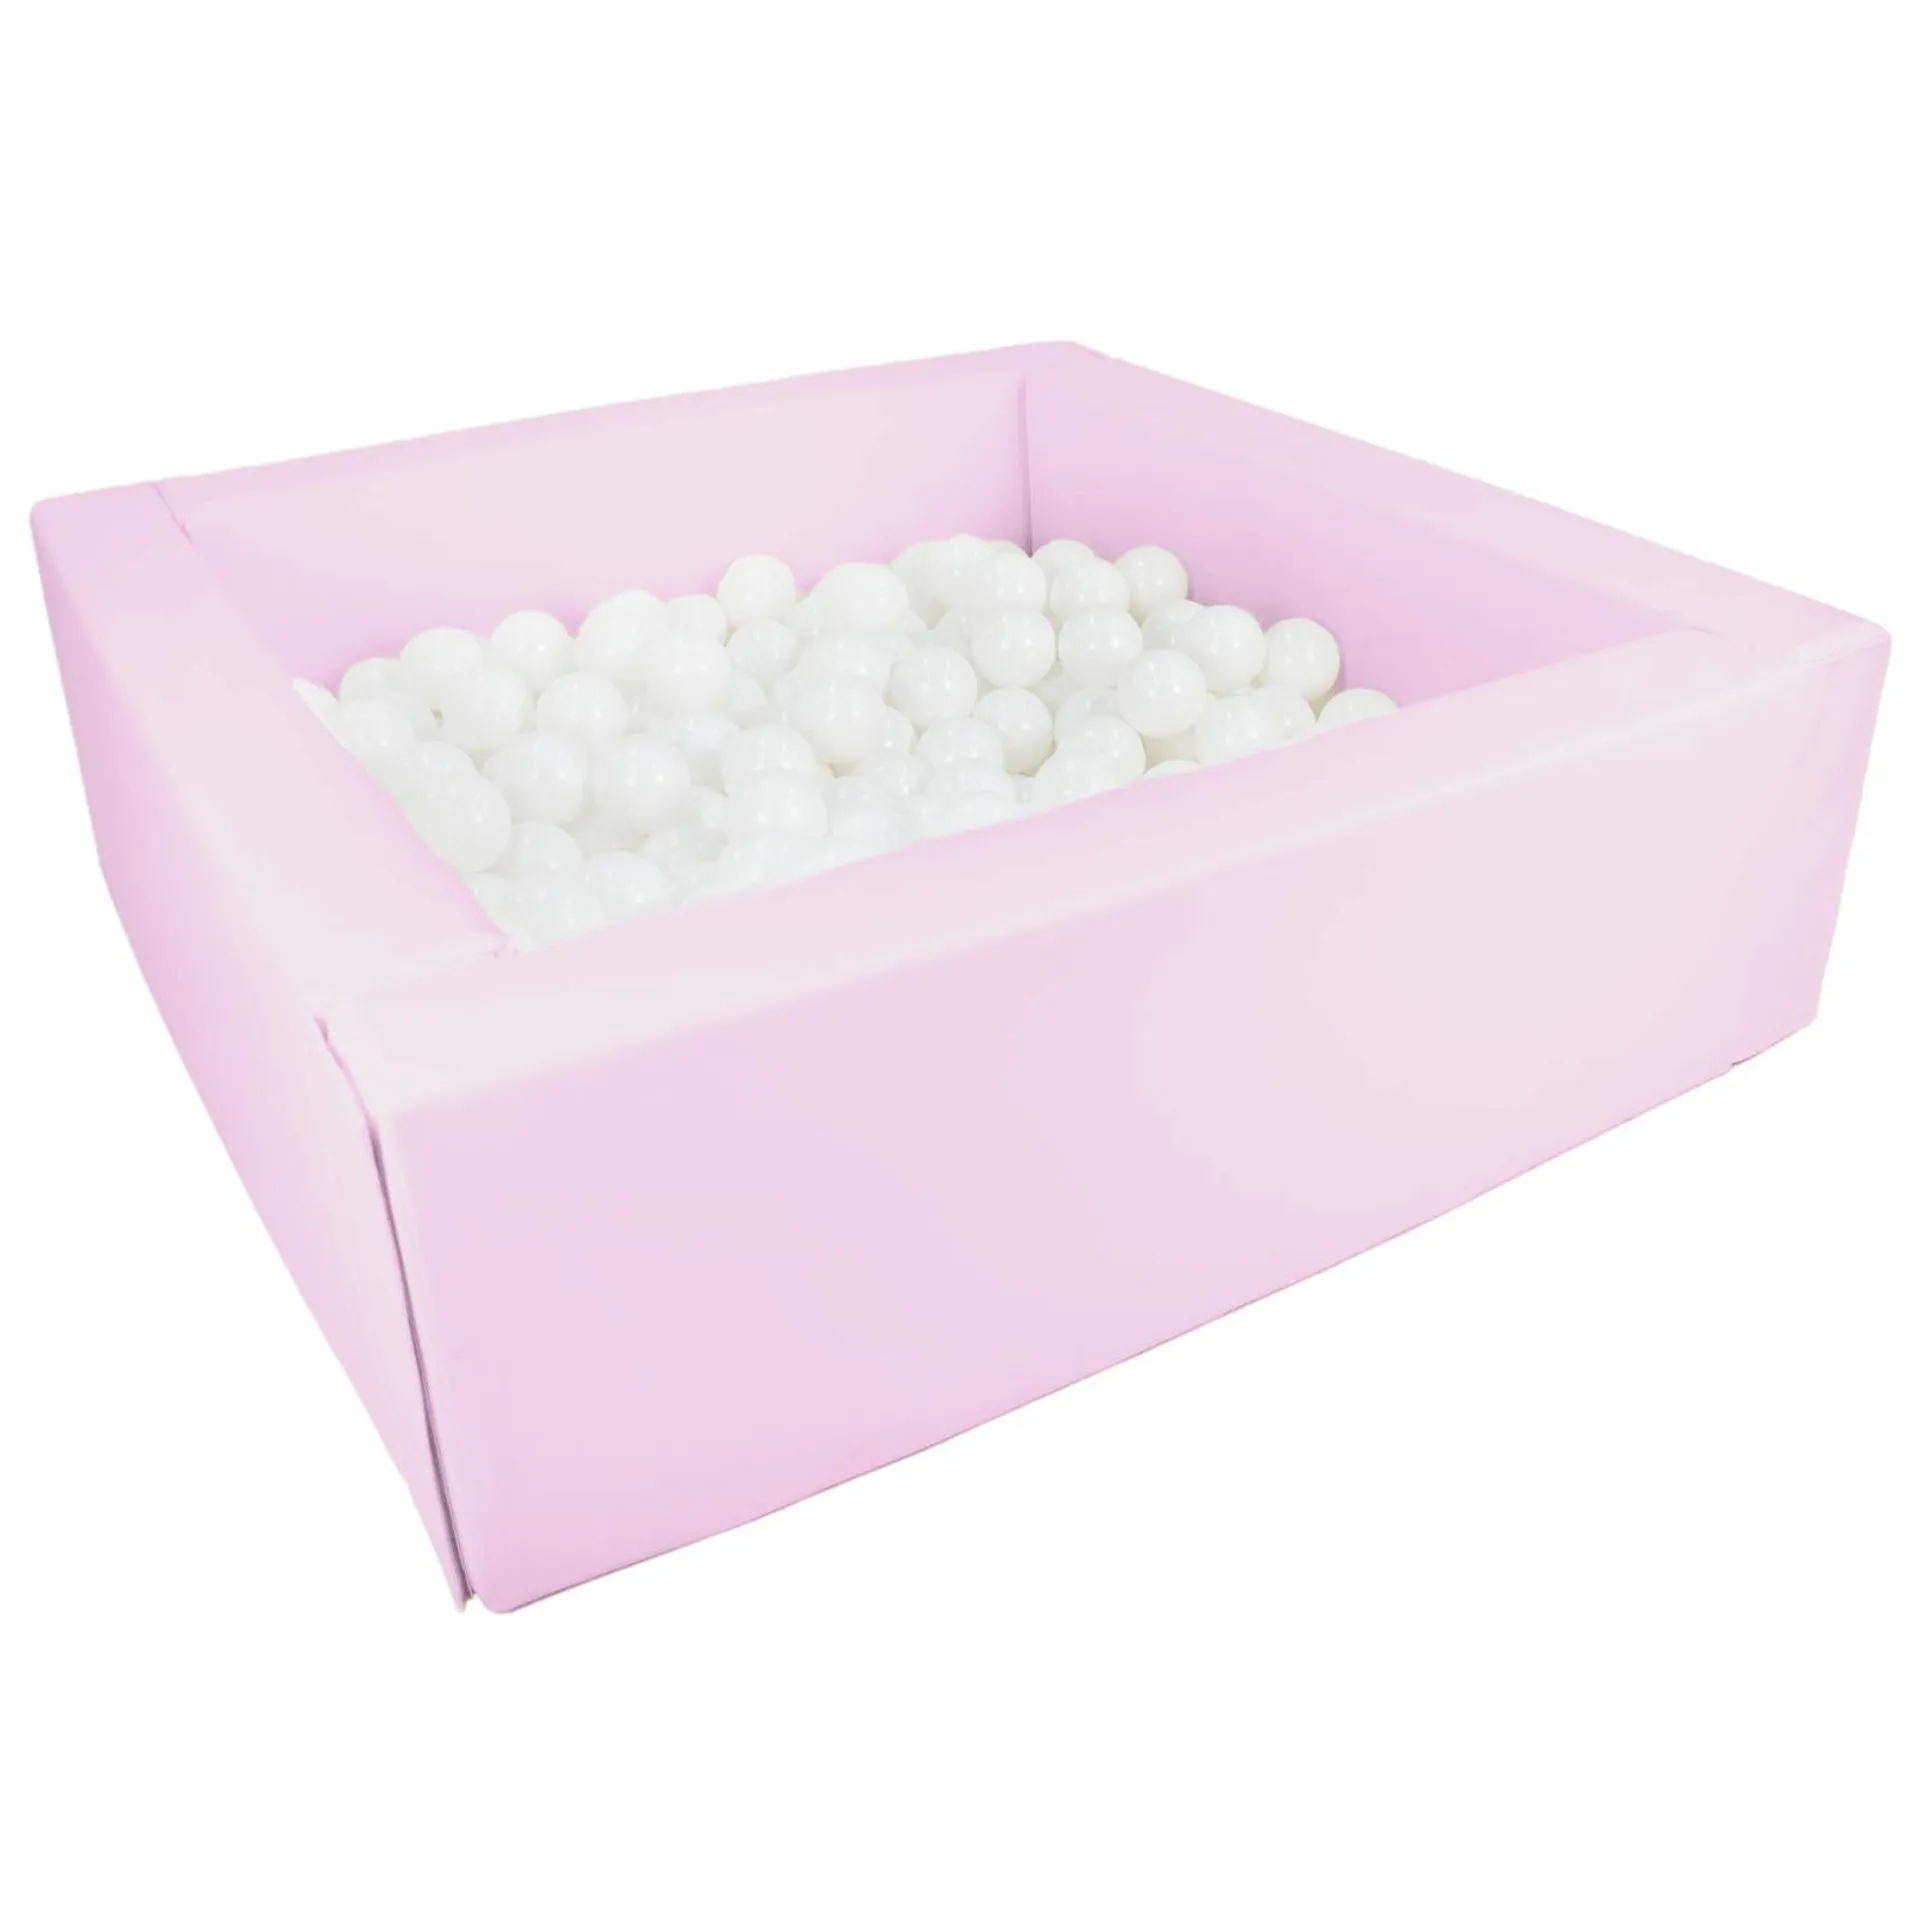 Eco Leather Pastel Blue Soft Play Ball Pit - 200 white balls